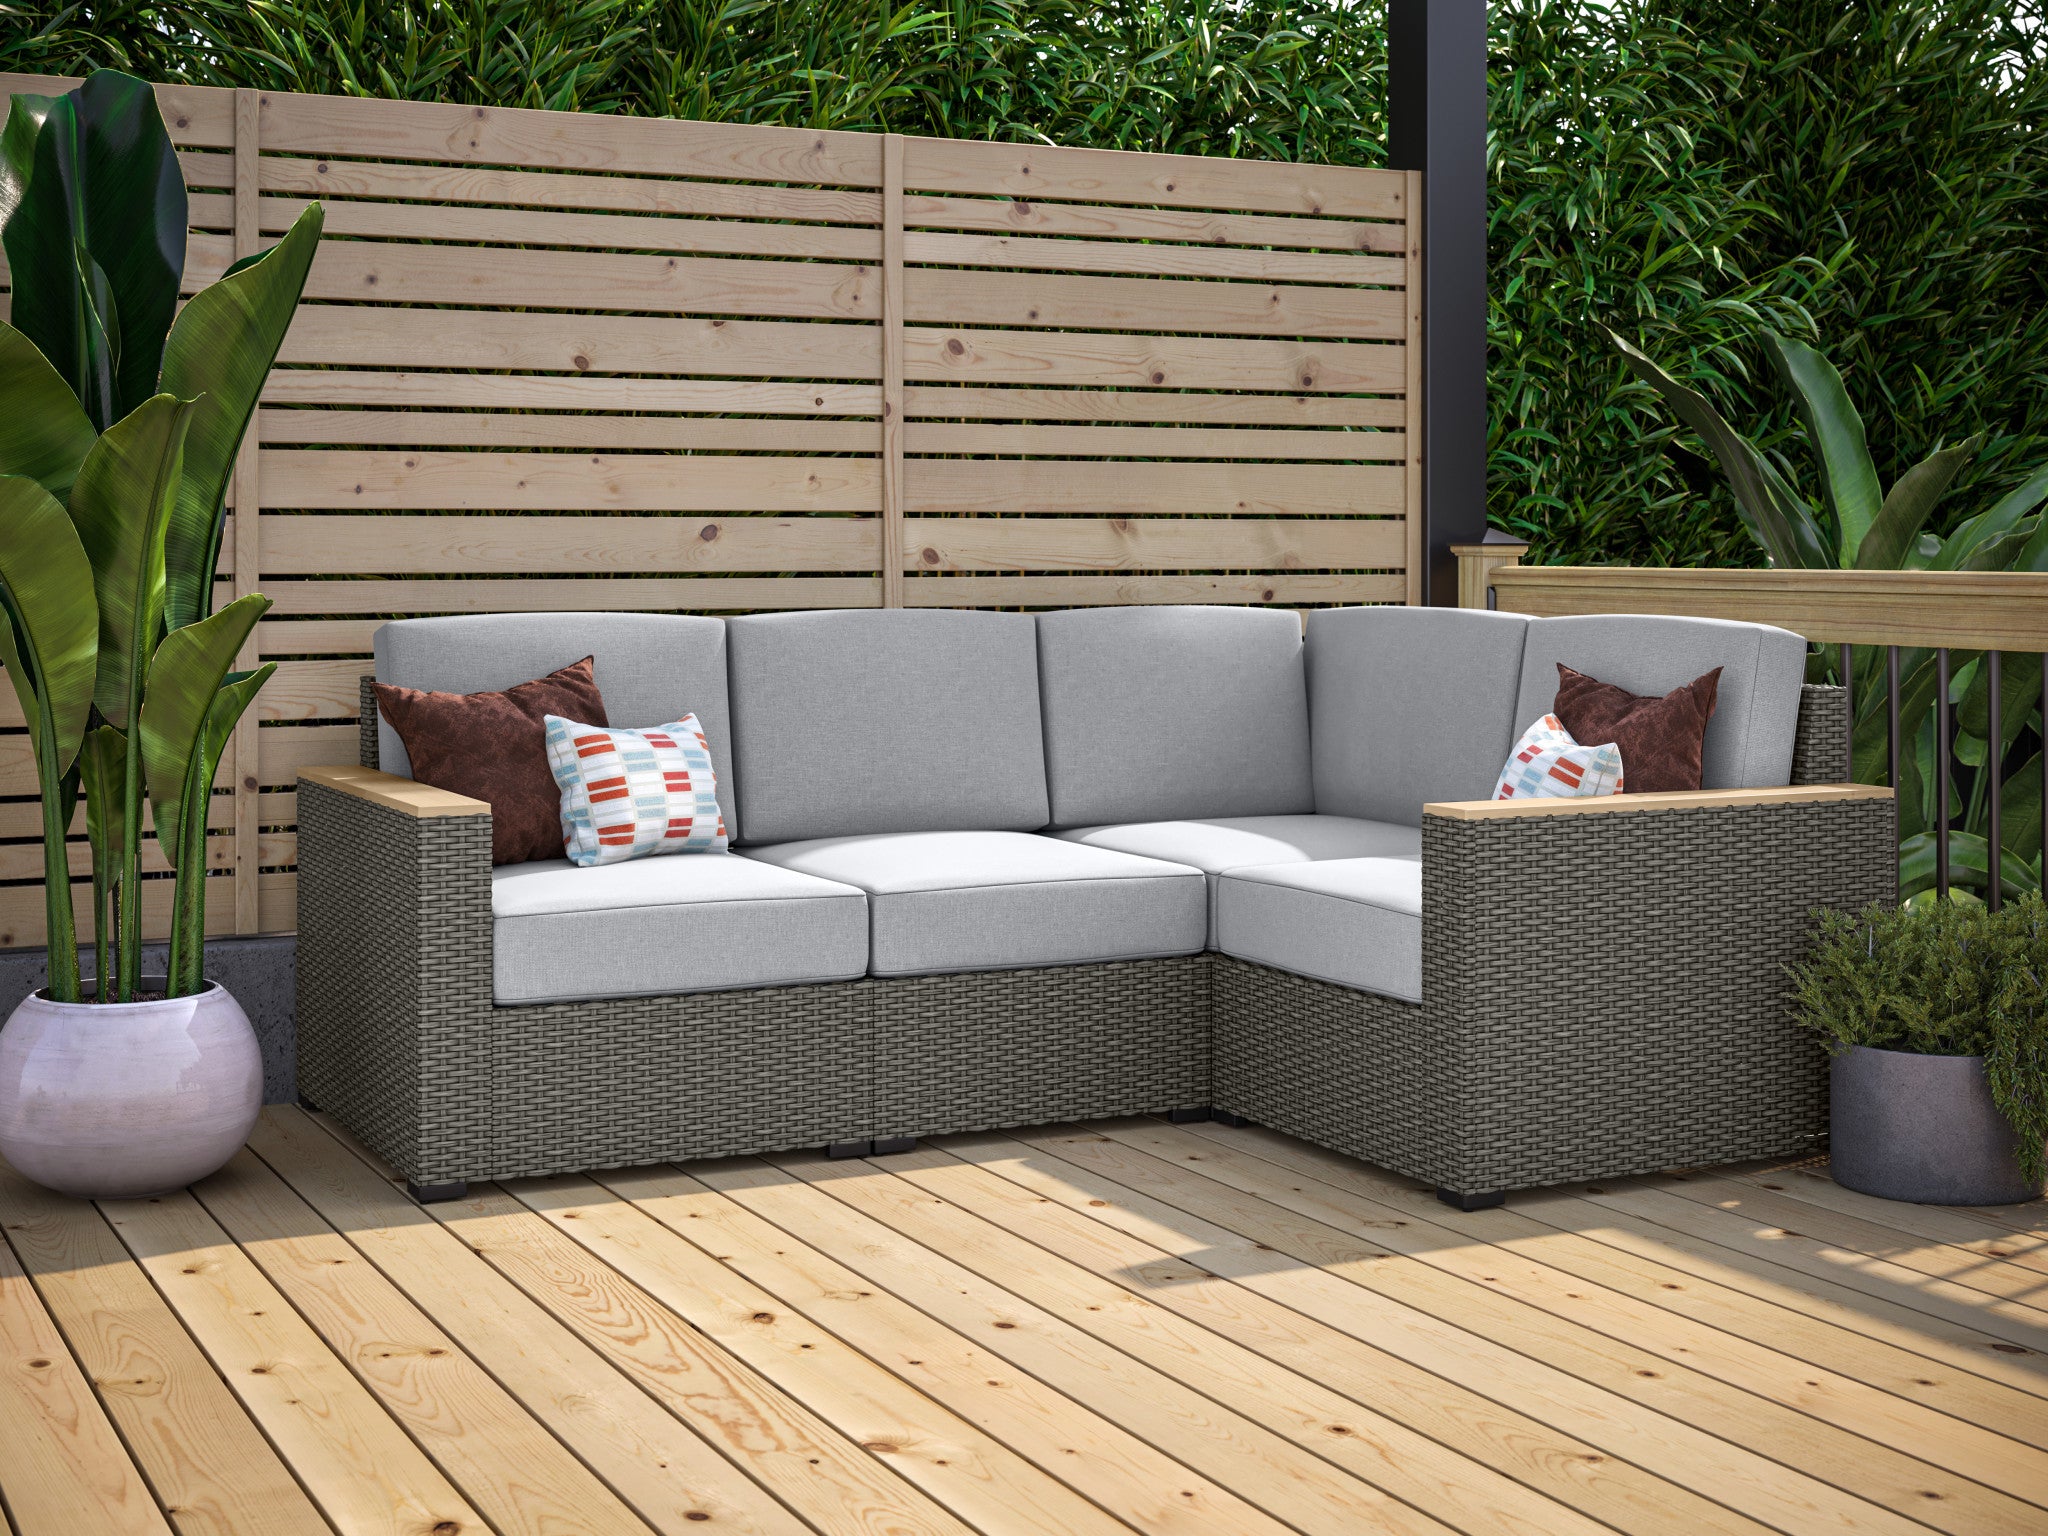 Boca Raton Outdoor 4 Seat Sectional by Homestyles - Brown - Rattan - 6801-40